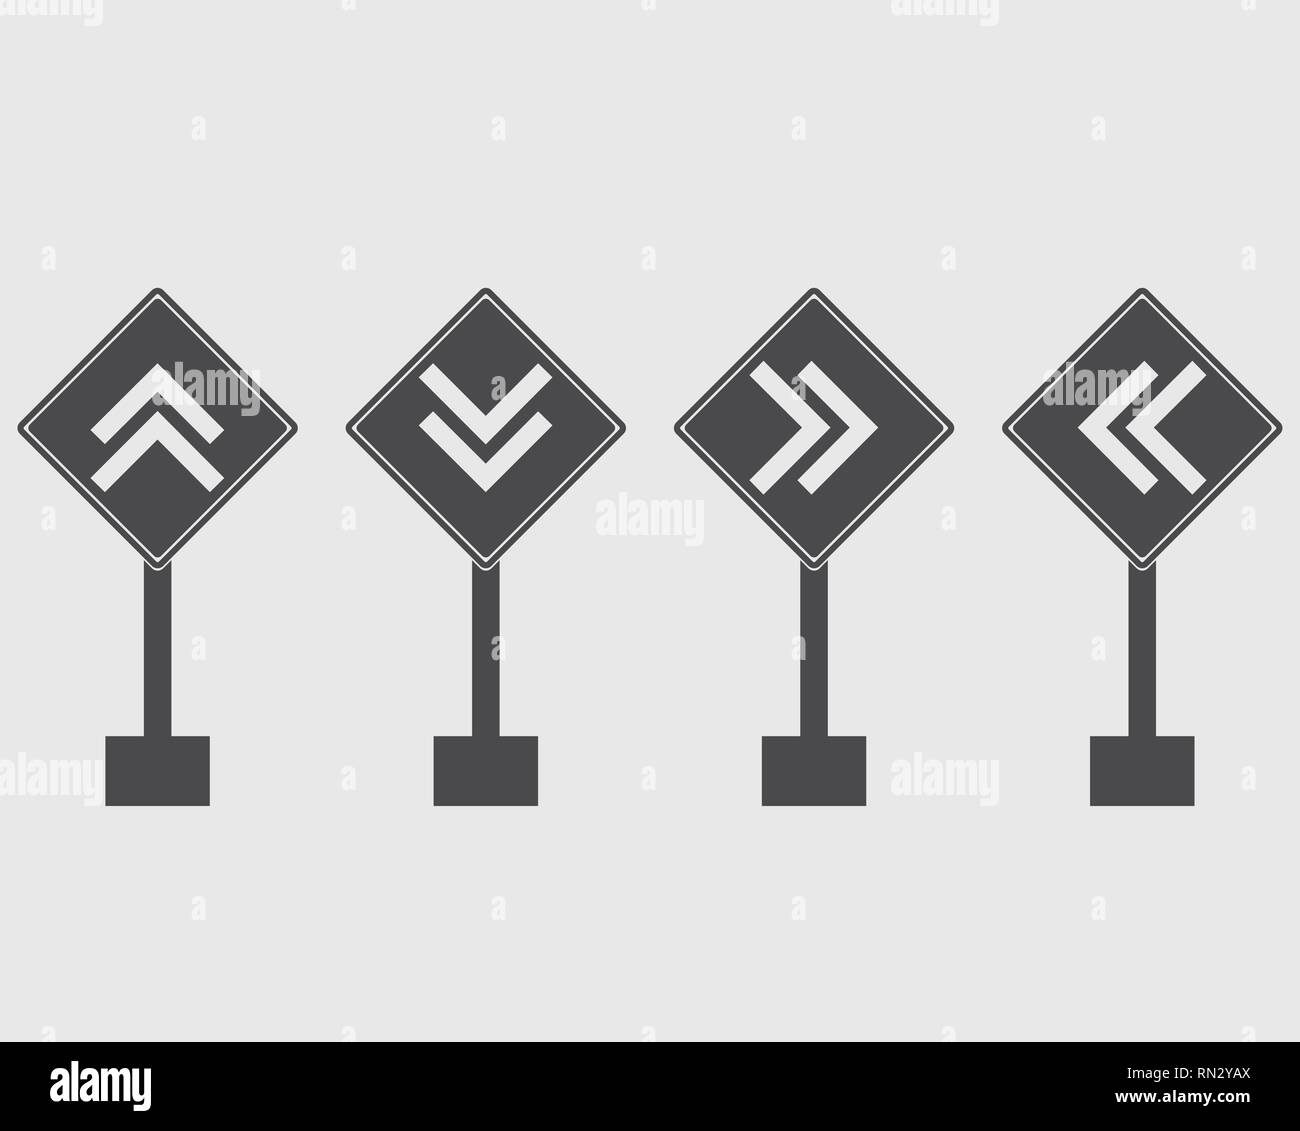 Arrow Sign icon of Highway on gray Background. Stock Vector